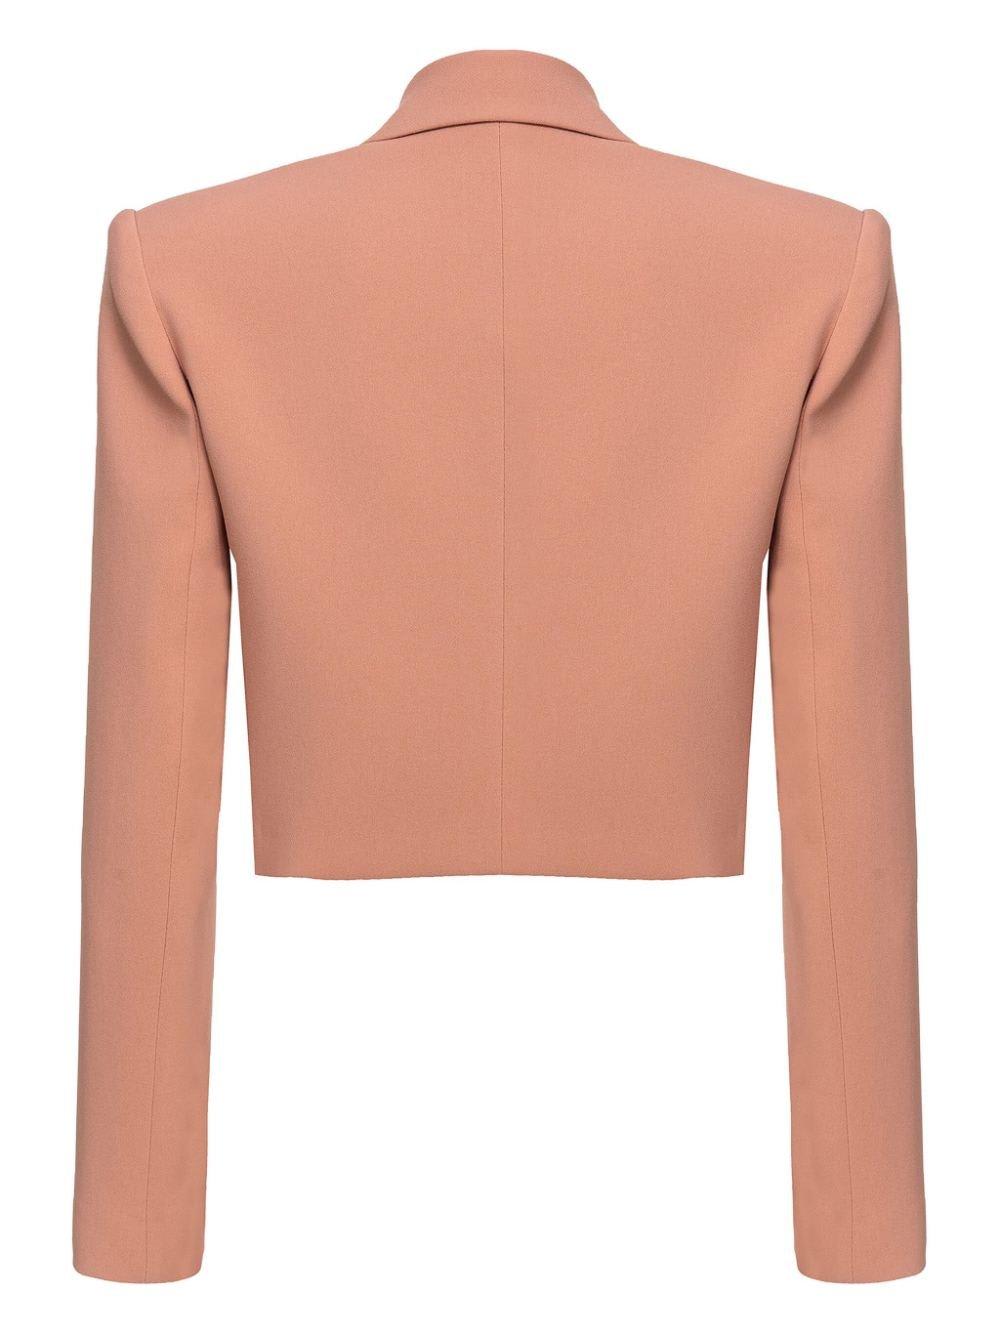 Shop Pinko Cropped Sleeved Blazer In Brown